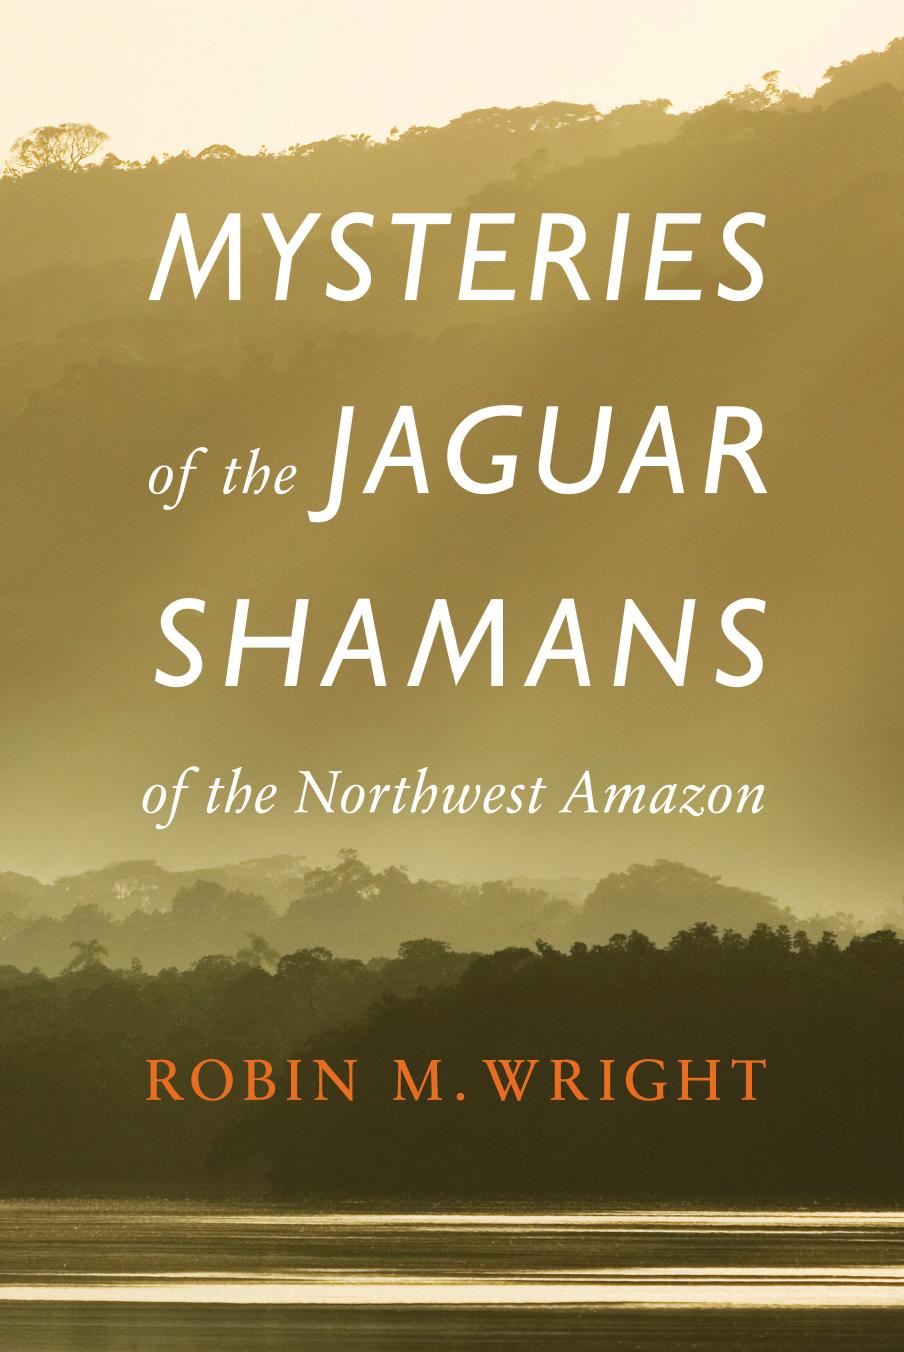 Mysteries of the Jaguar Shamans of the Northwest Amazon by Robin Wright